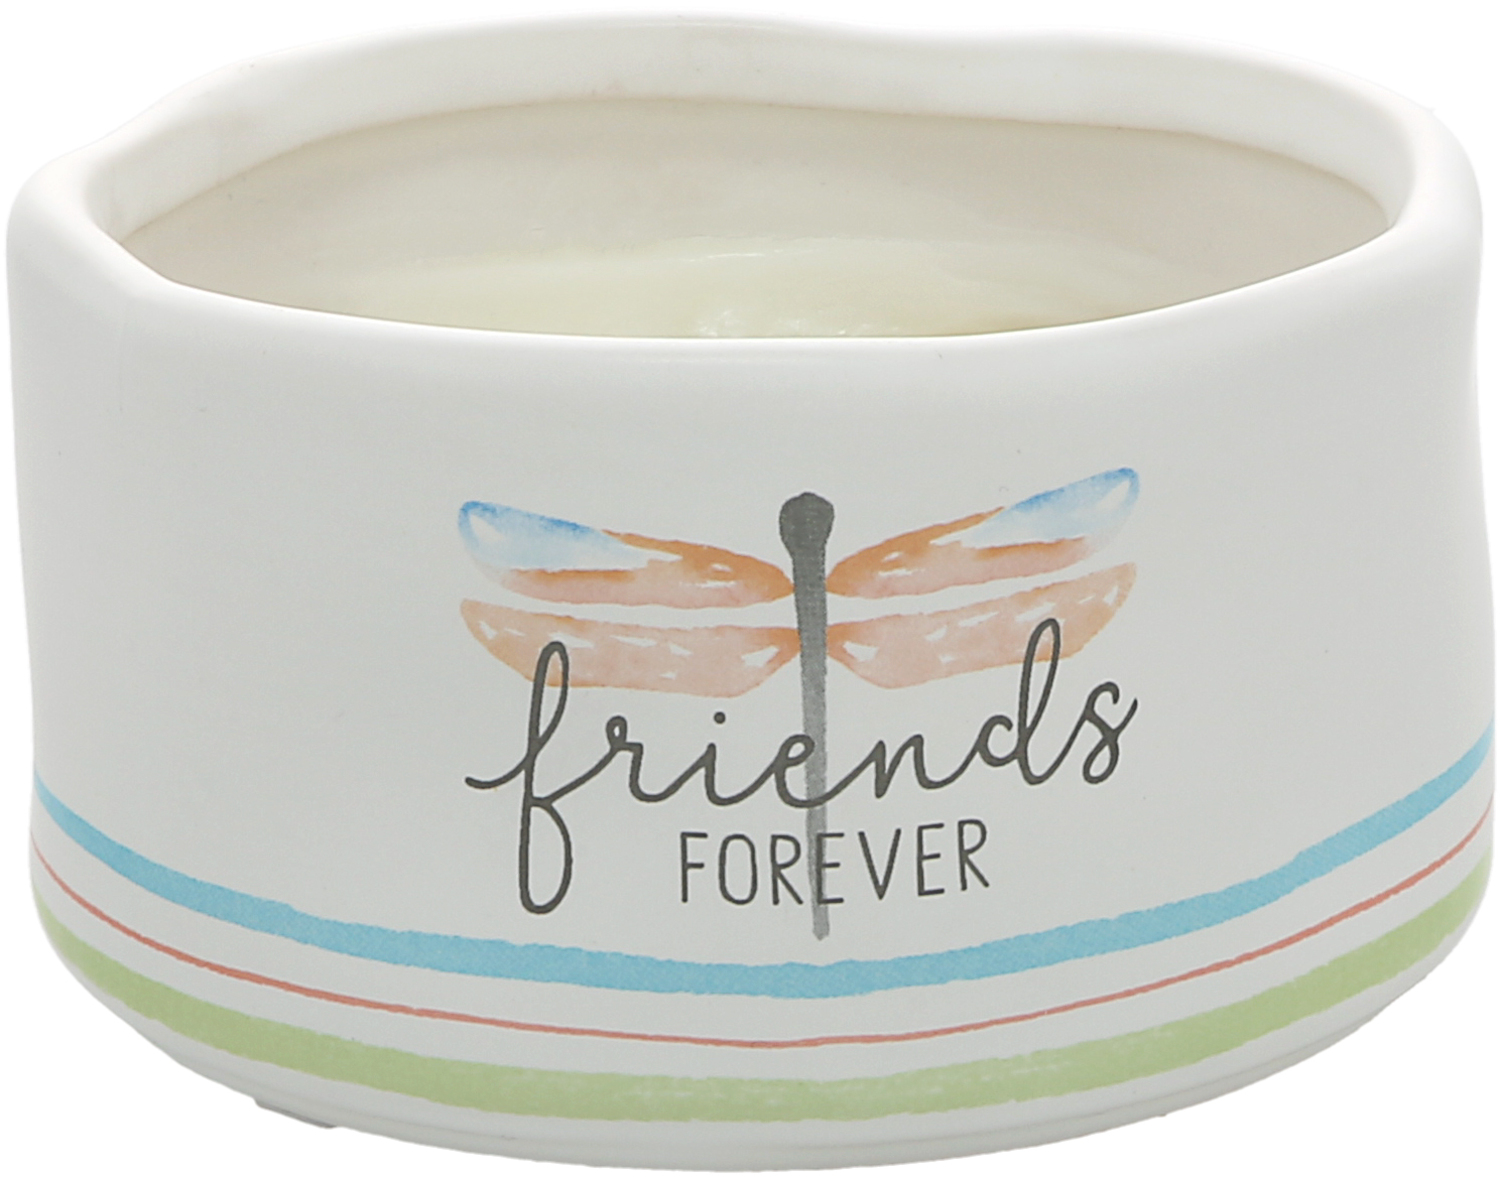 Friends Forever by Graceful Love -BCB - Friends Forever - 8 oz - 100% Soy Wax Reveal Candle
Scent: Tranquility